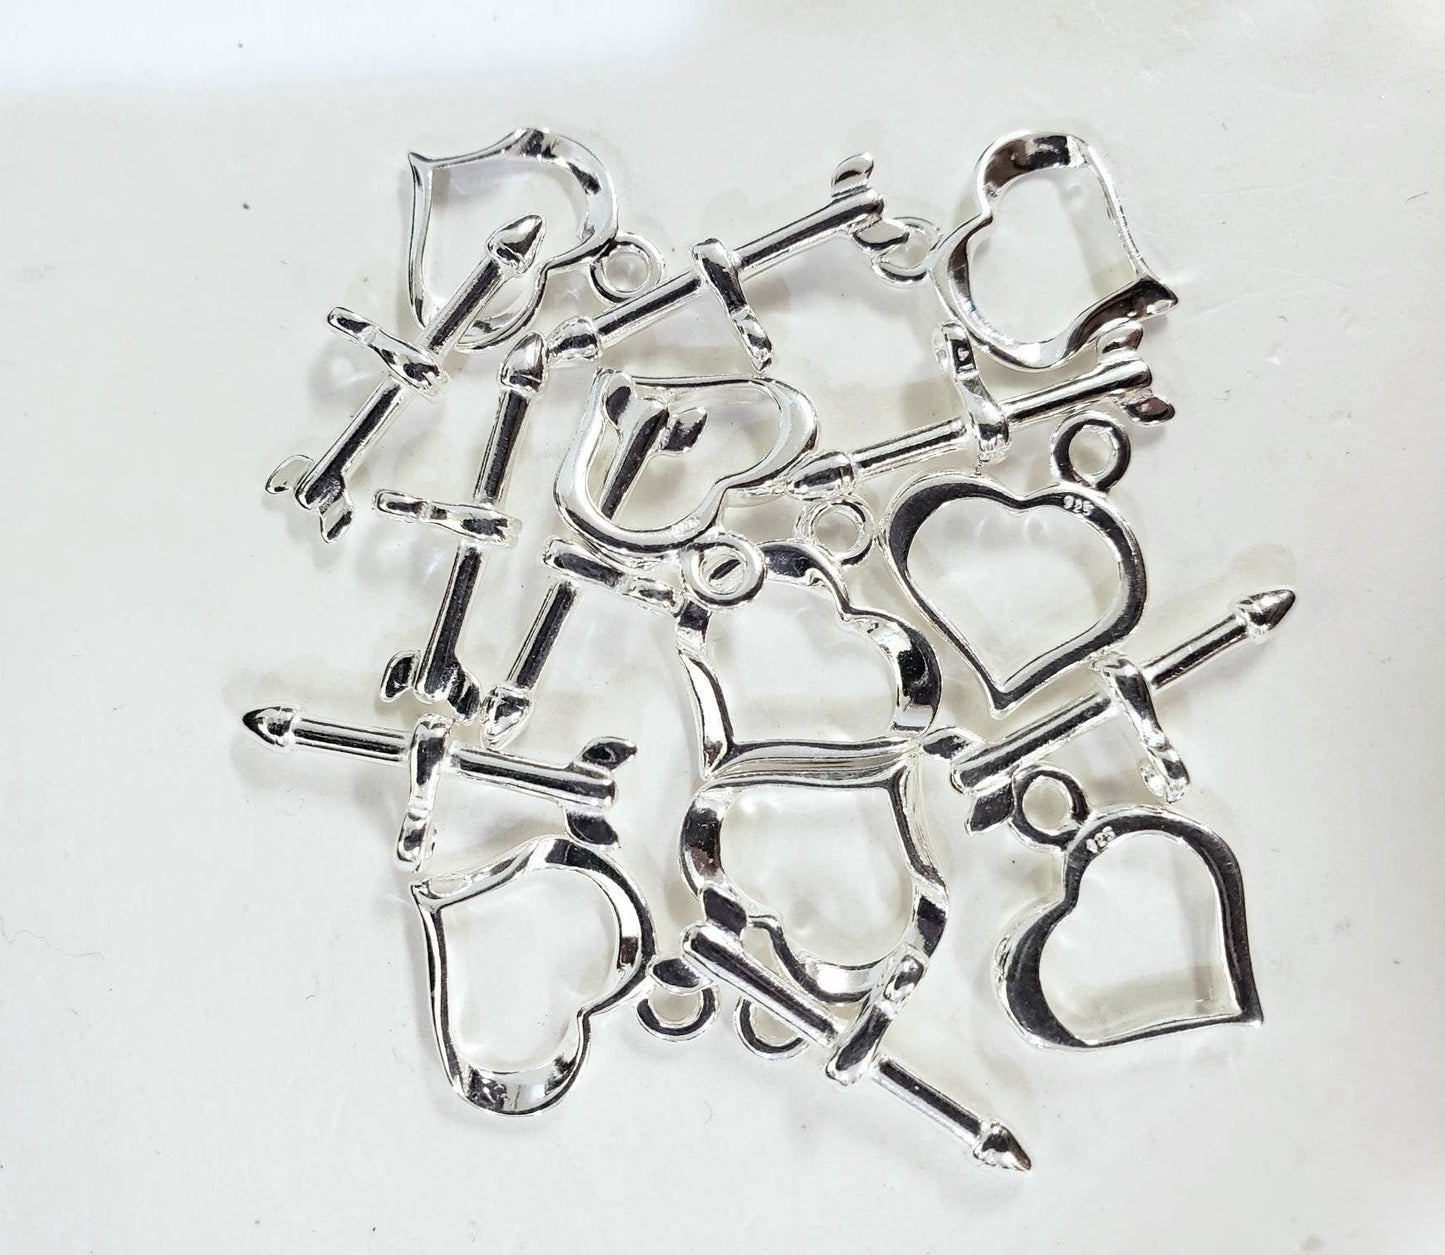 925 Sterling Silver heart shape shiny toggle clasp, 13mm heart and 29mm bar, jewelry making clasp, 925 stamped, 1 set or bulk